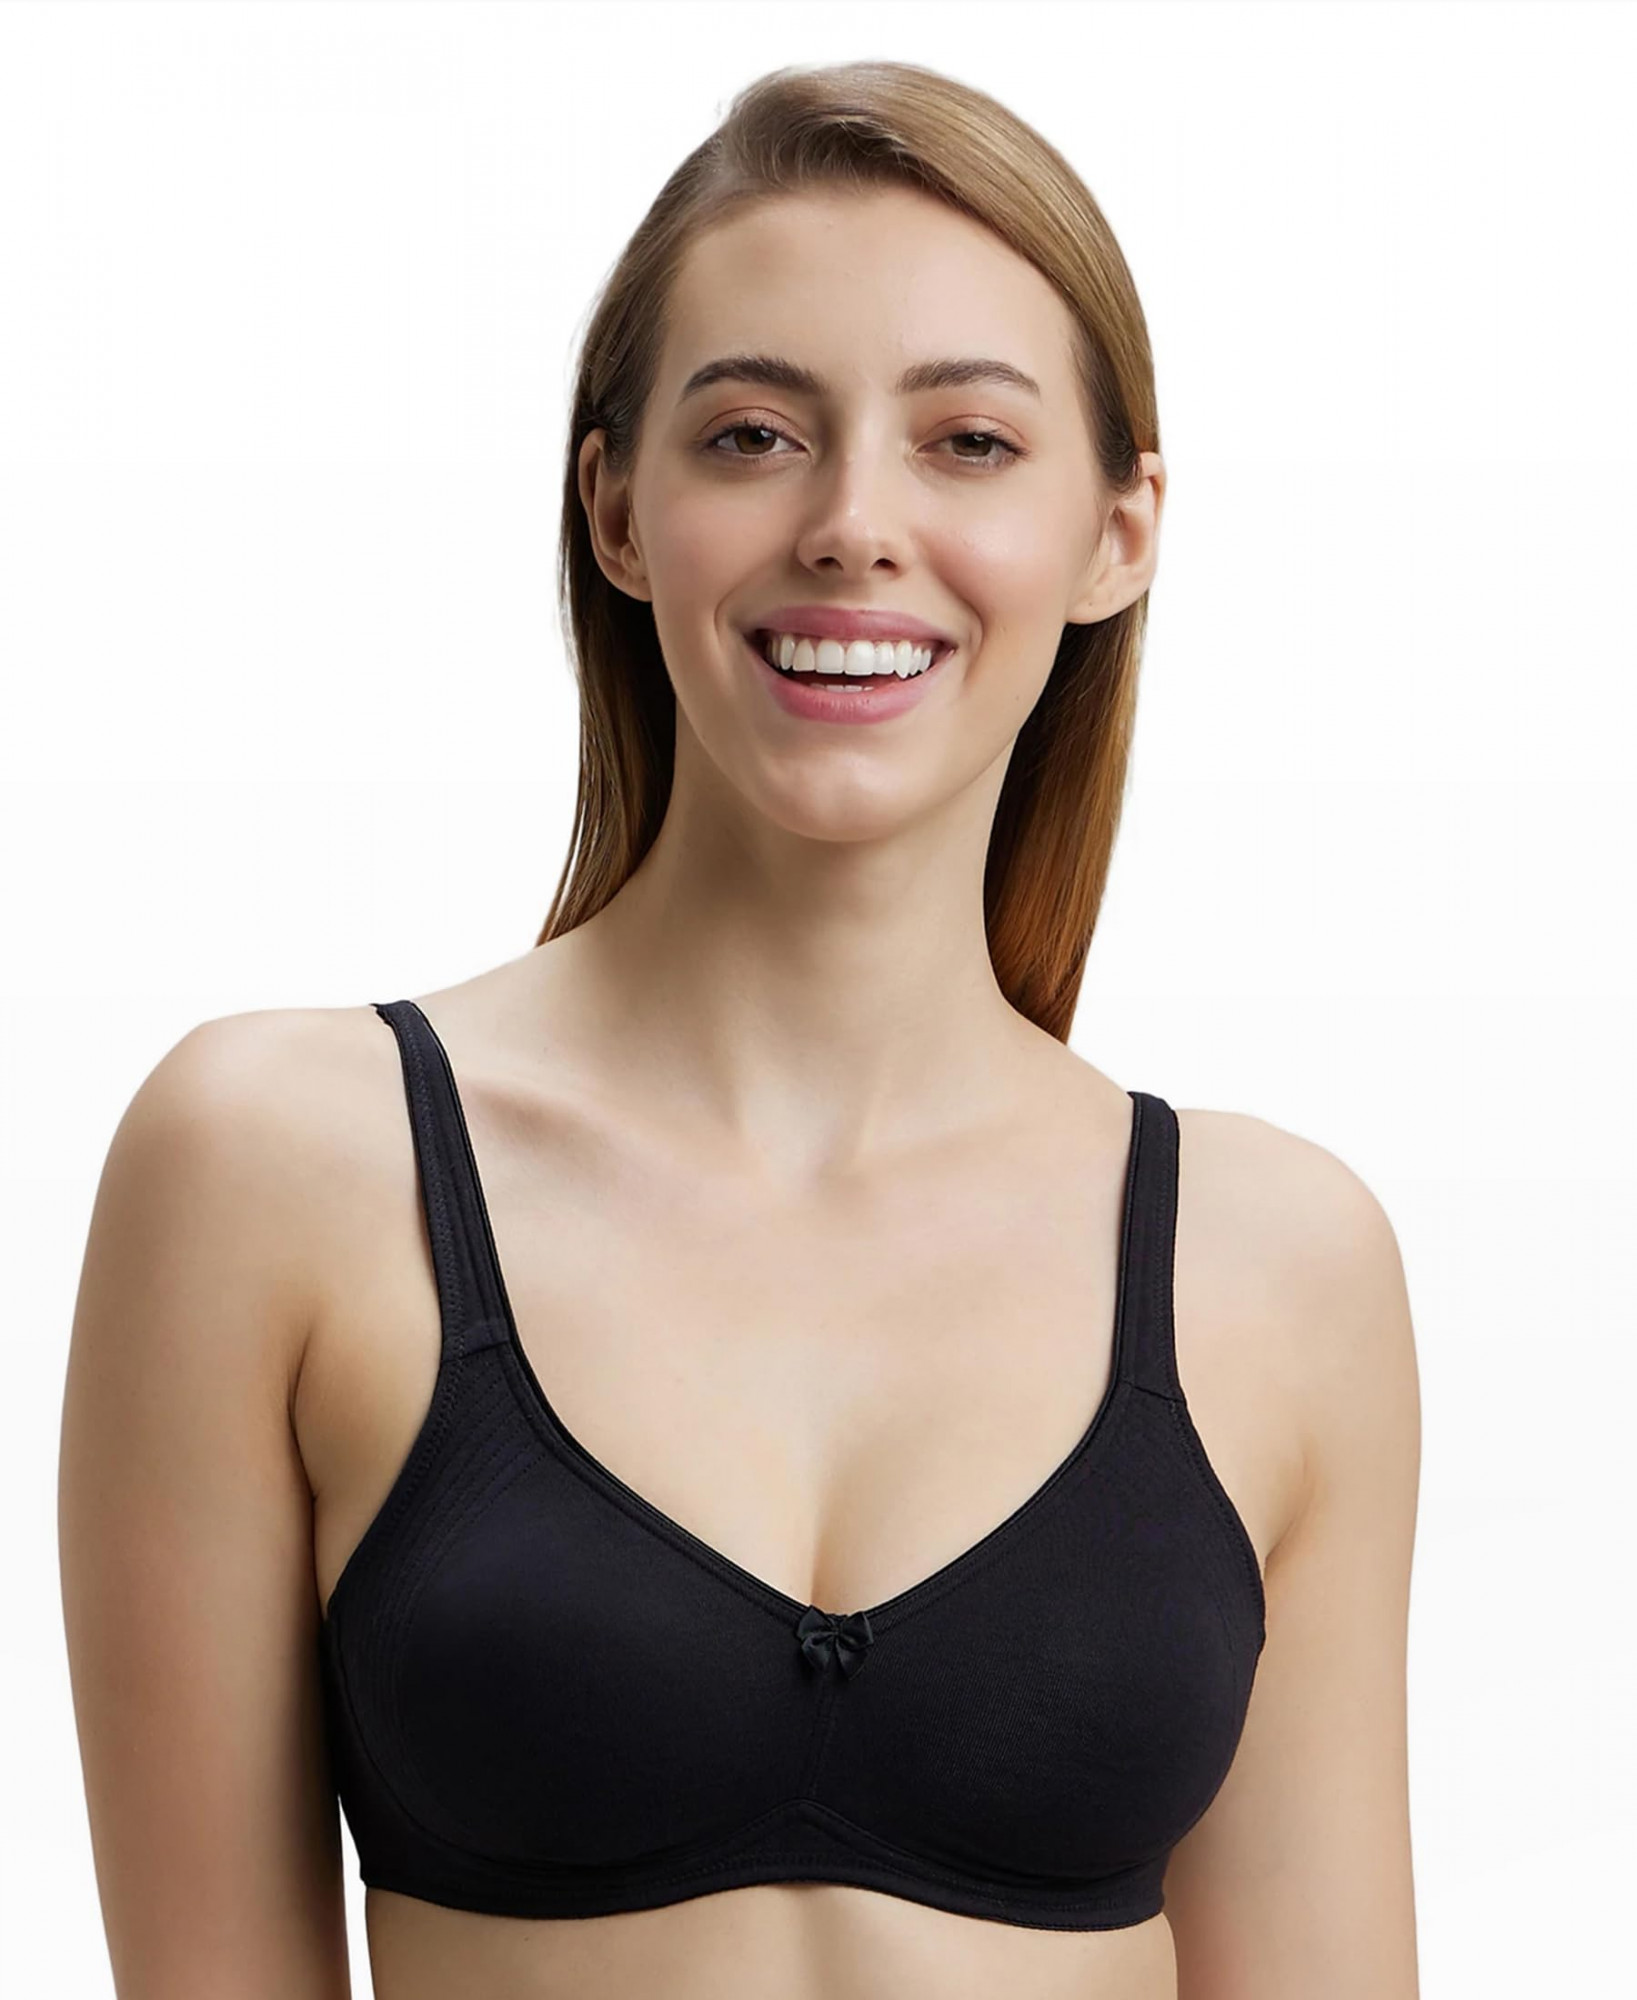 https://www.fastemi.com/uploads/fastemicom/products/jockey-1250-womenamp039s-wirefree-non-padded-super-combed-cotton-elastane-stretch-full-coverage-everyday-bra-with-contoured-shaper-panel-and-adjustable-strapsblack38b-129973453227337_l.jpg